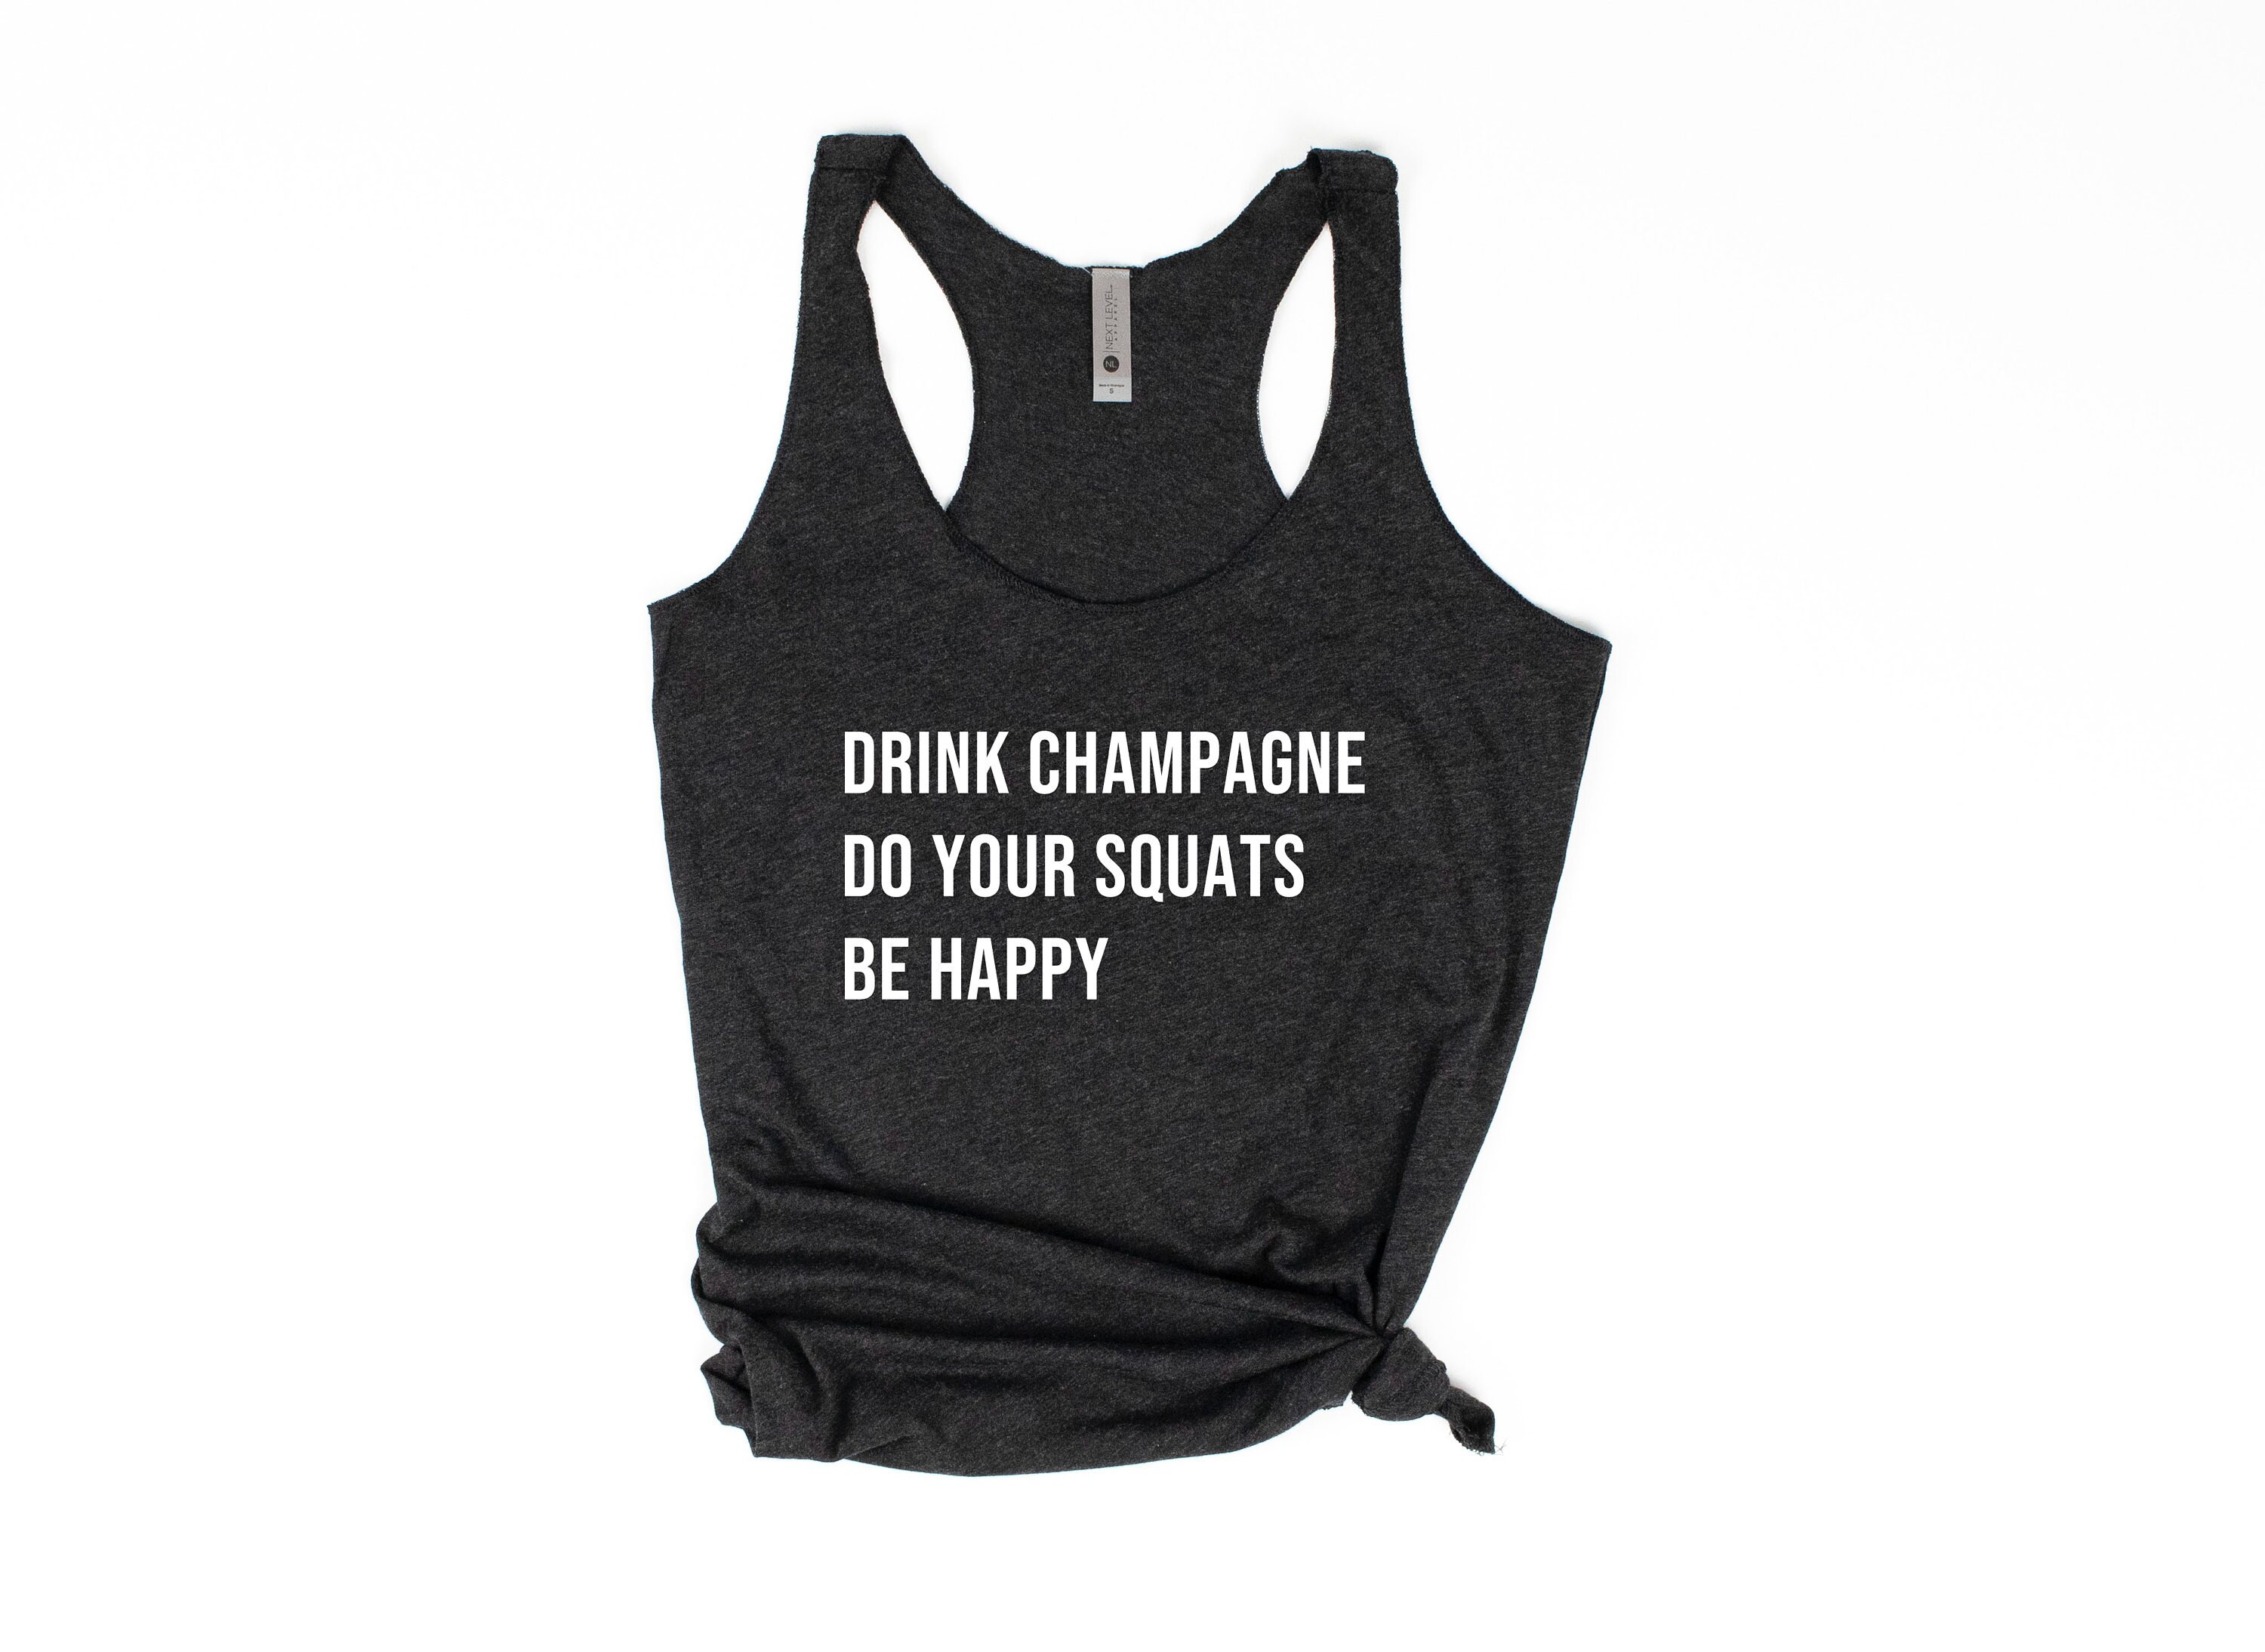 Drink Champagne Do Your Squats Be Happy Tank Top Womens | Etsy